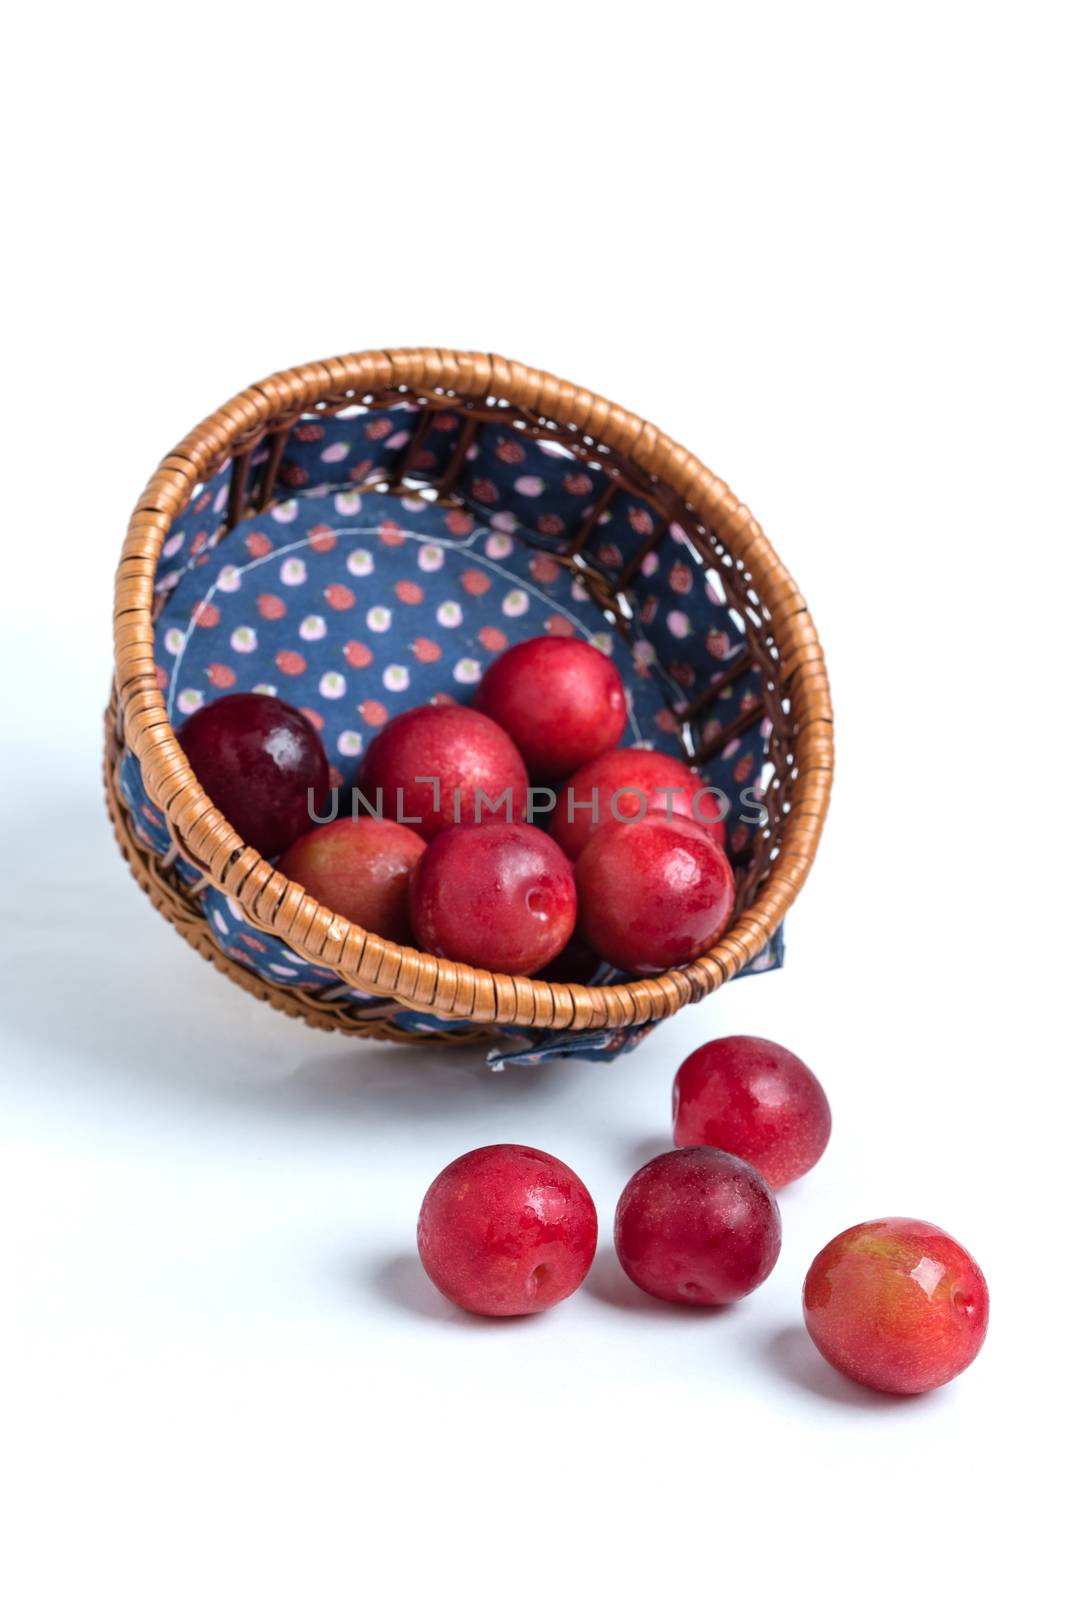 Plums Falling from Basket by justtscott